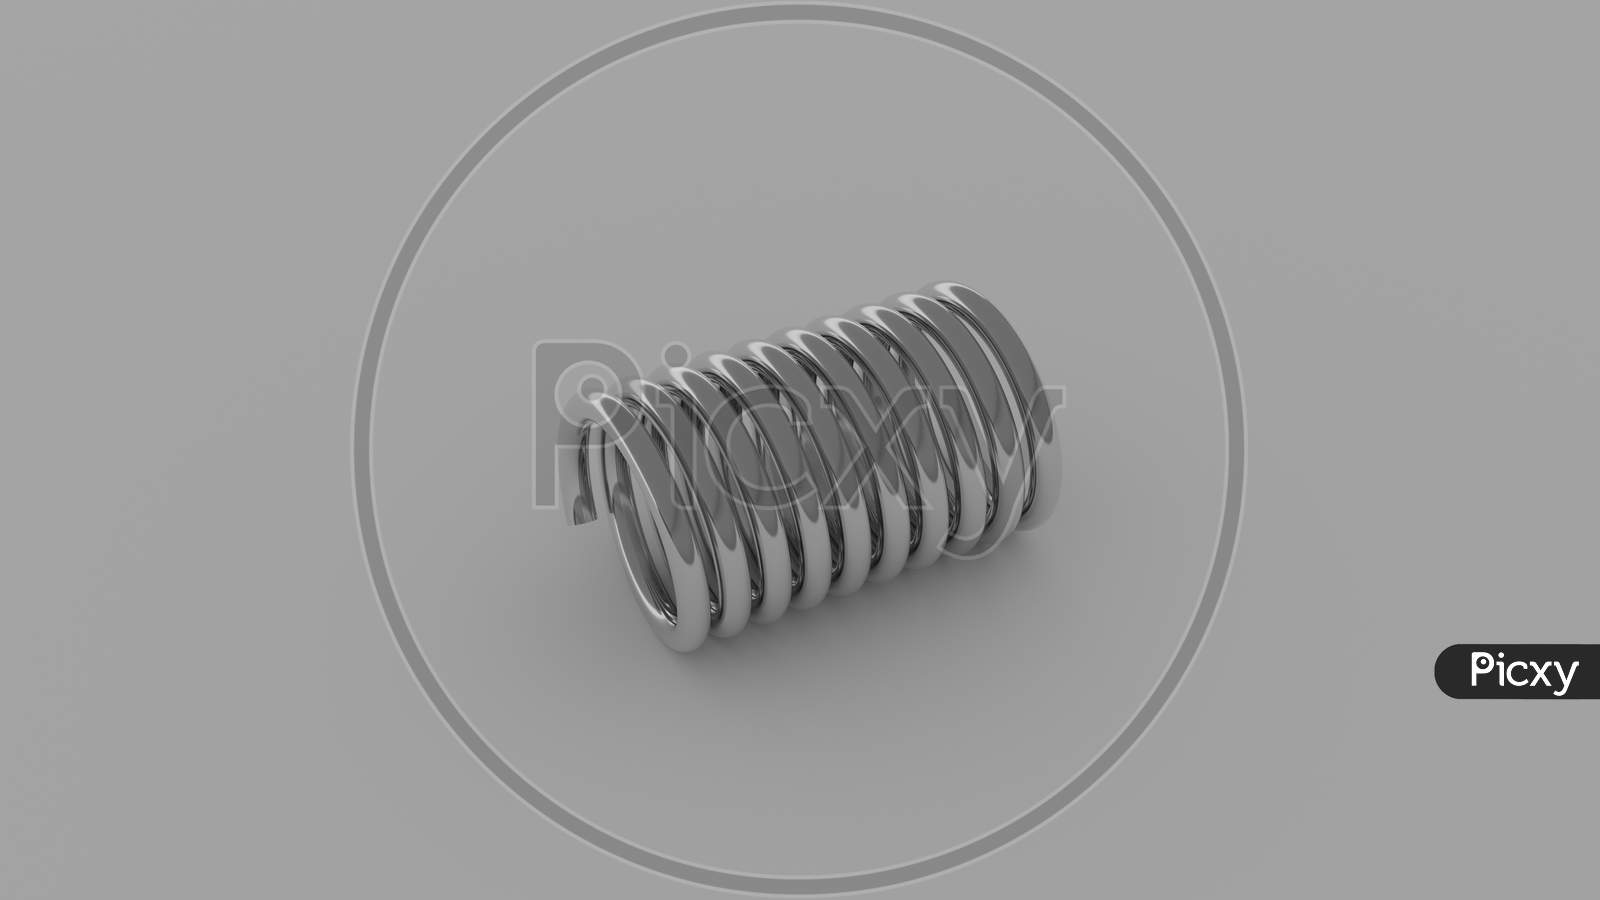 Steel Spring On A White Background